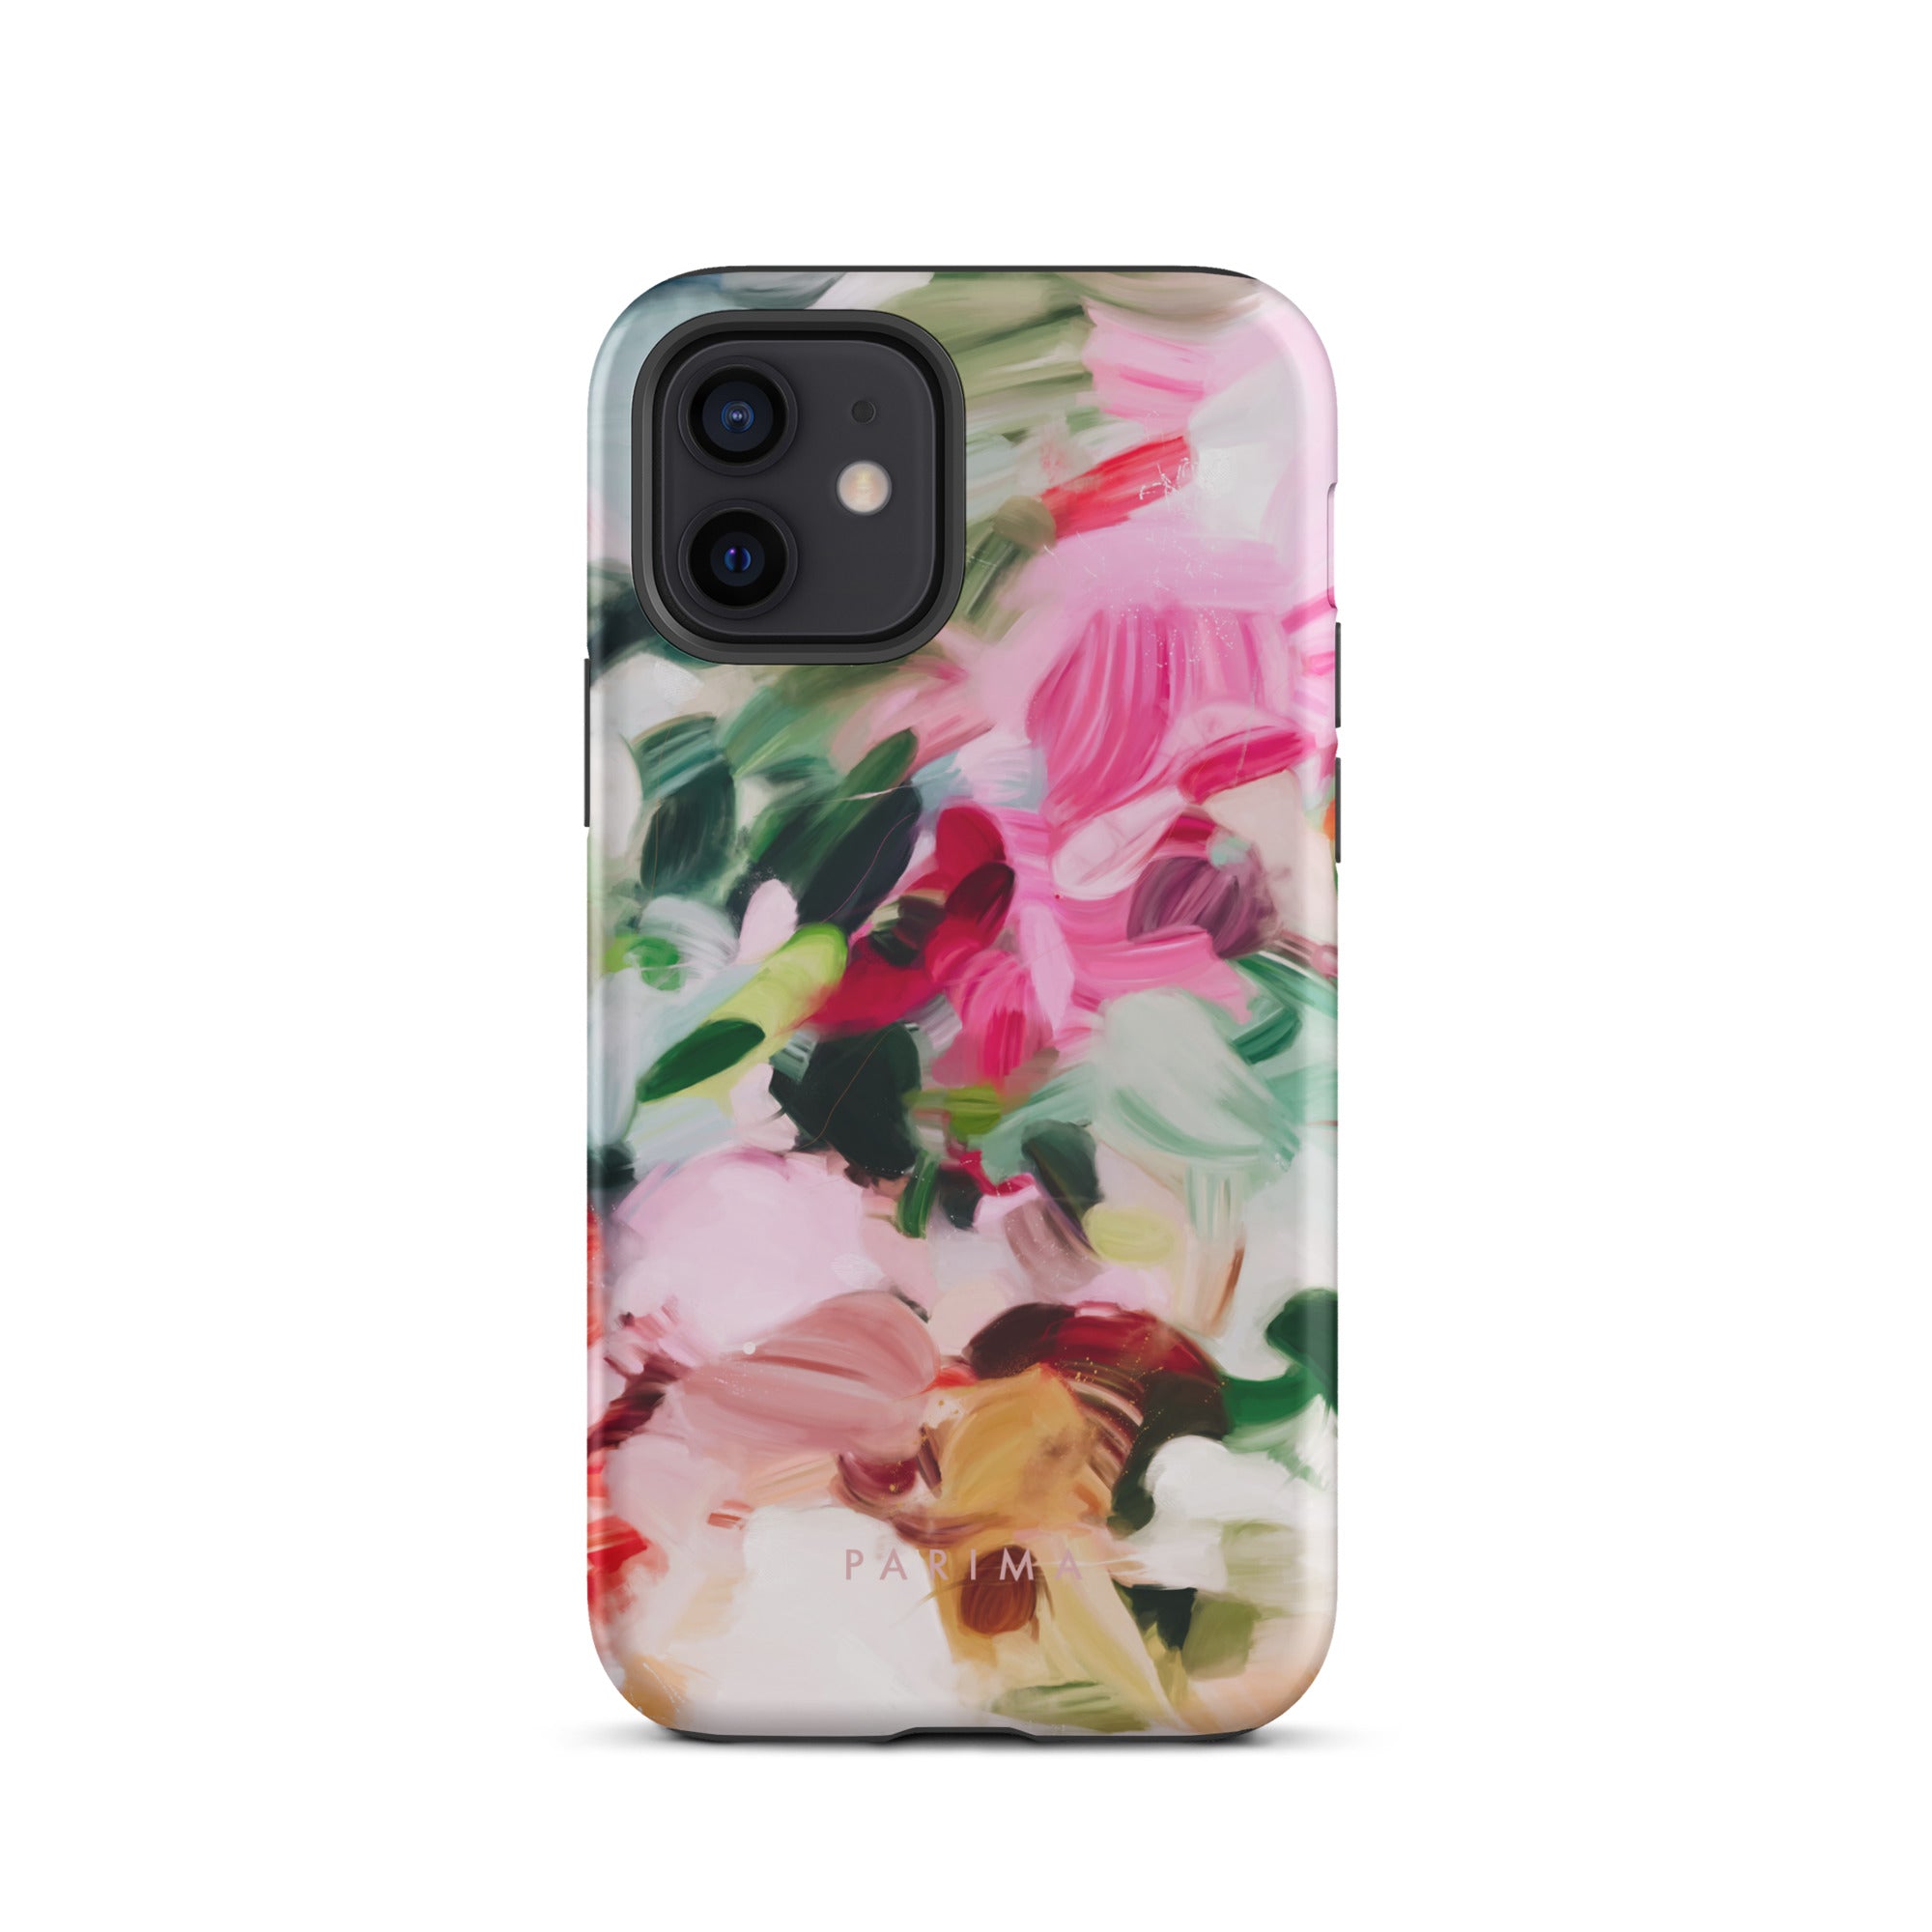 Bloom, pink and green abstract art - iPhone 12 tough case by Parima Studio